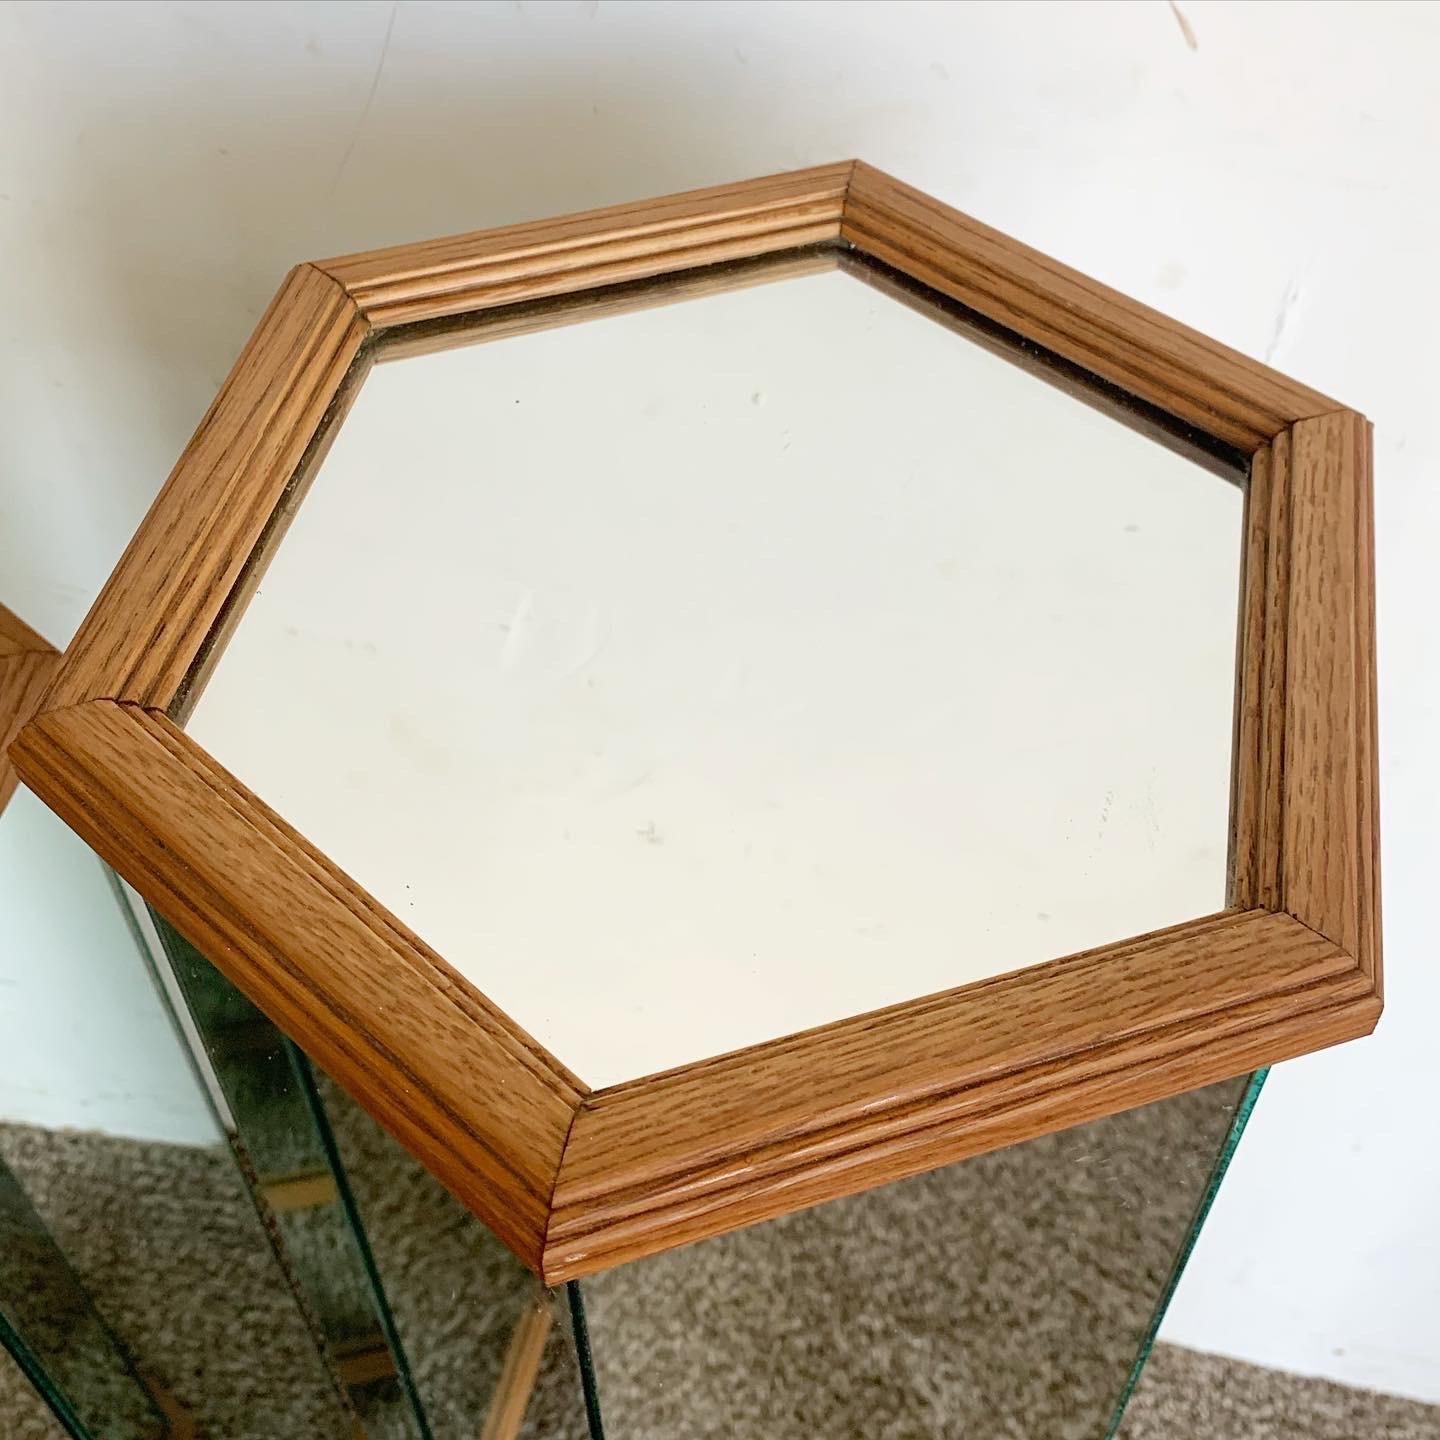 Late 20th Century Postmodern Mirrored Hexagonal Wooden Framed Pedestal Side Tables - a Pair For Sale